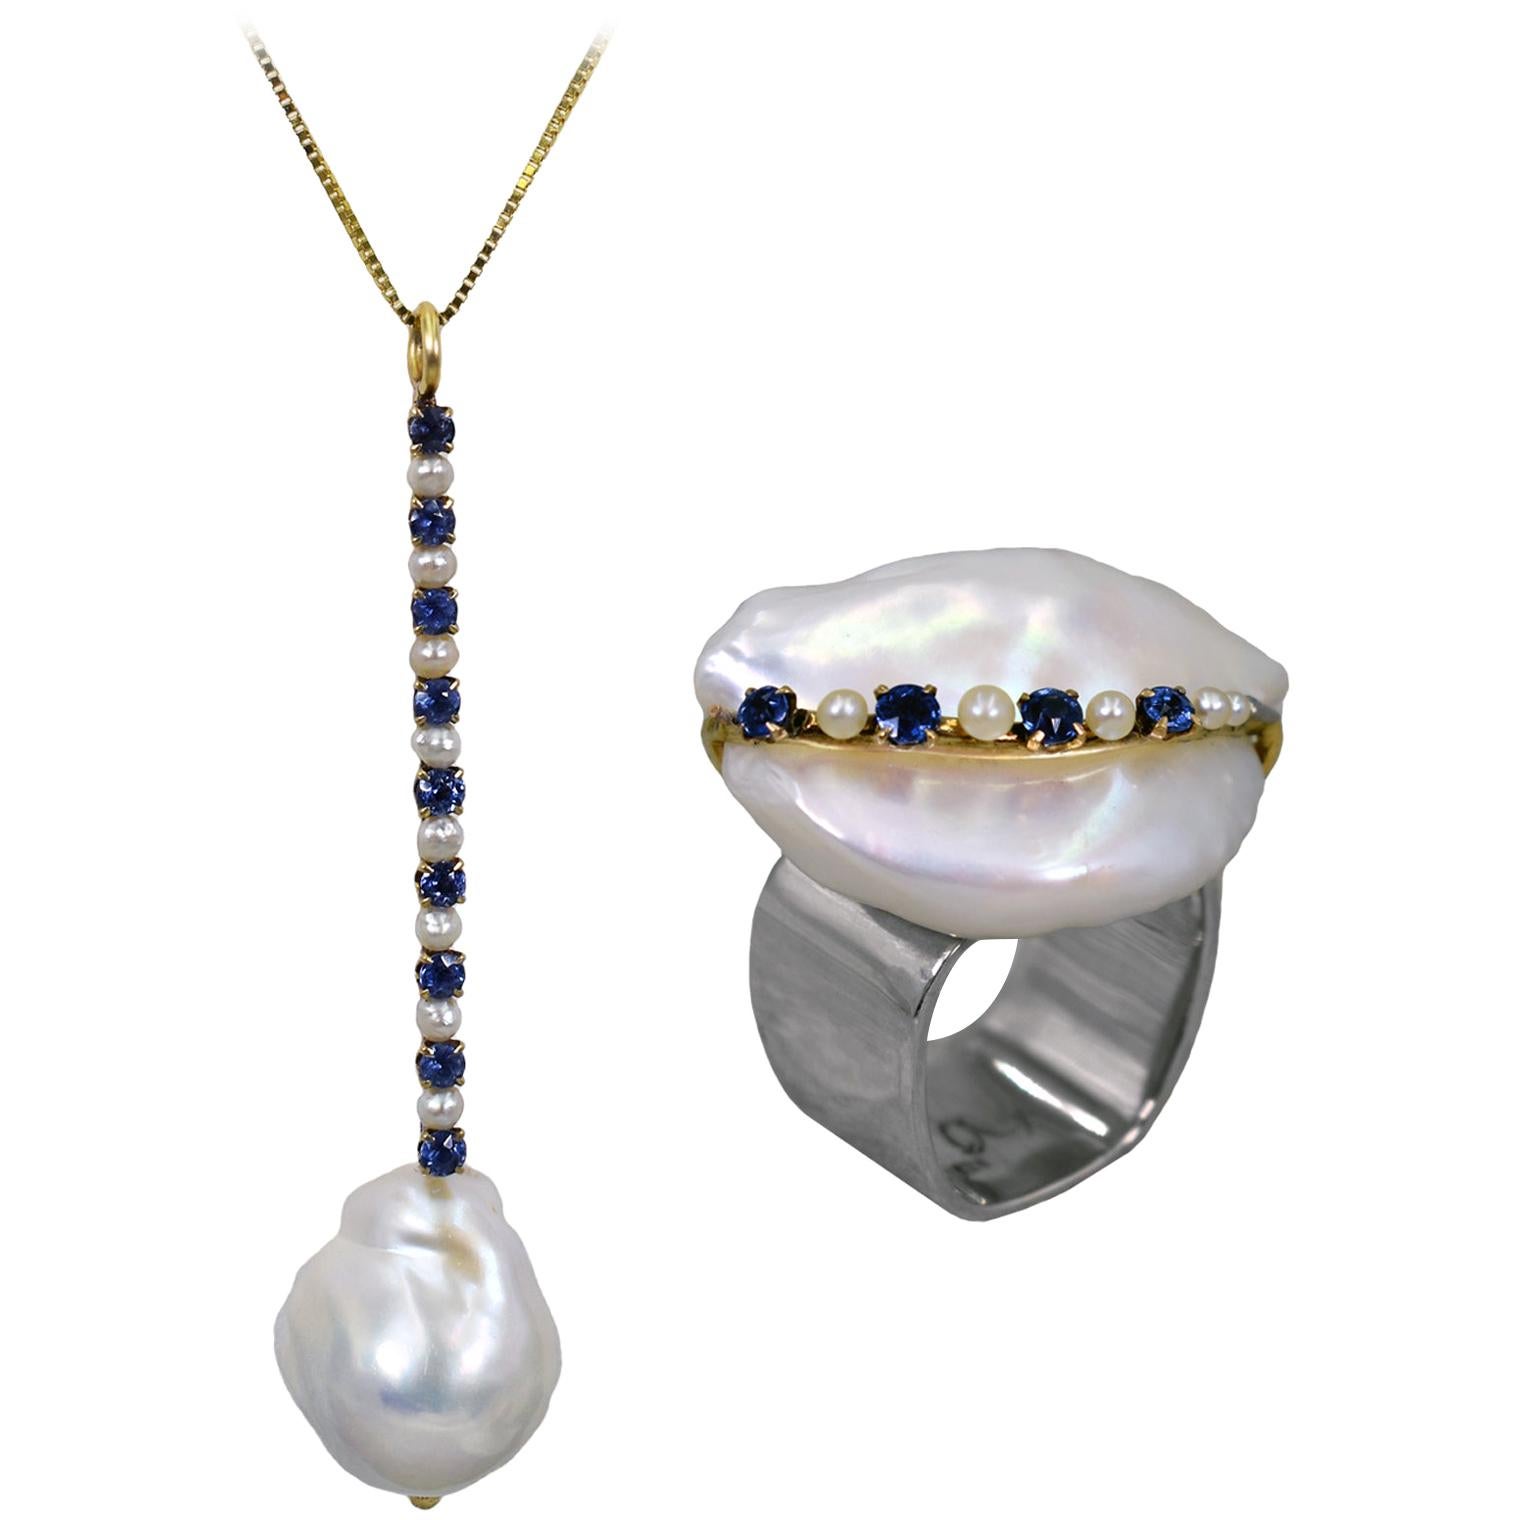 Baroque Pearl, Blue Sapphire & 14k Gold Pendant Necklace and Cocktail Ring Set For Sale